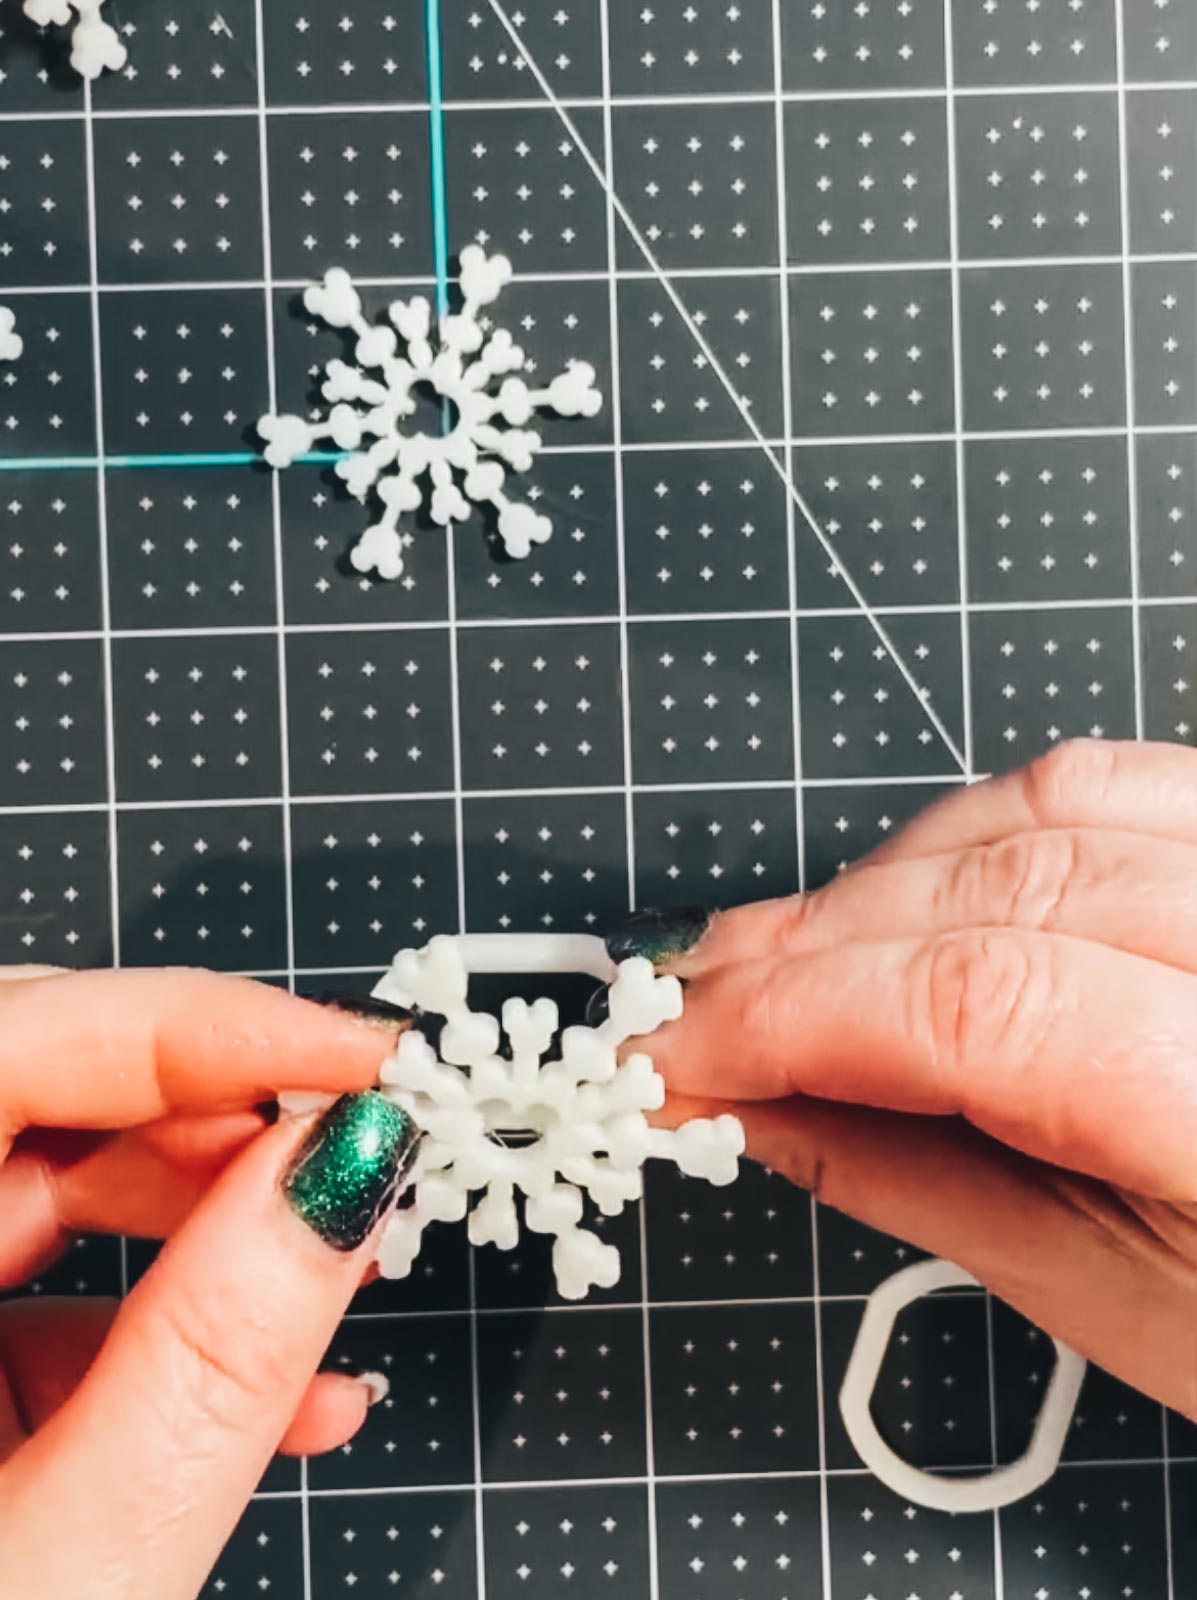 Glue your snowflake to the shank to make a napkin holder